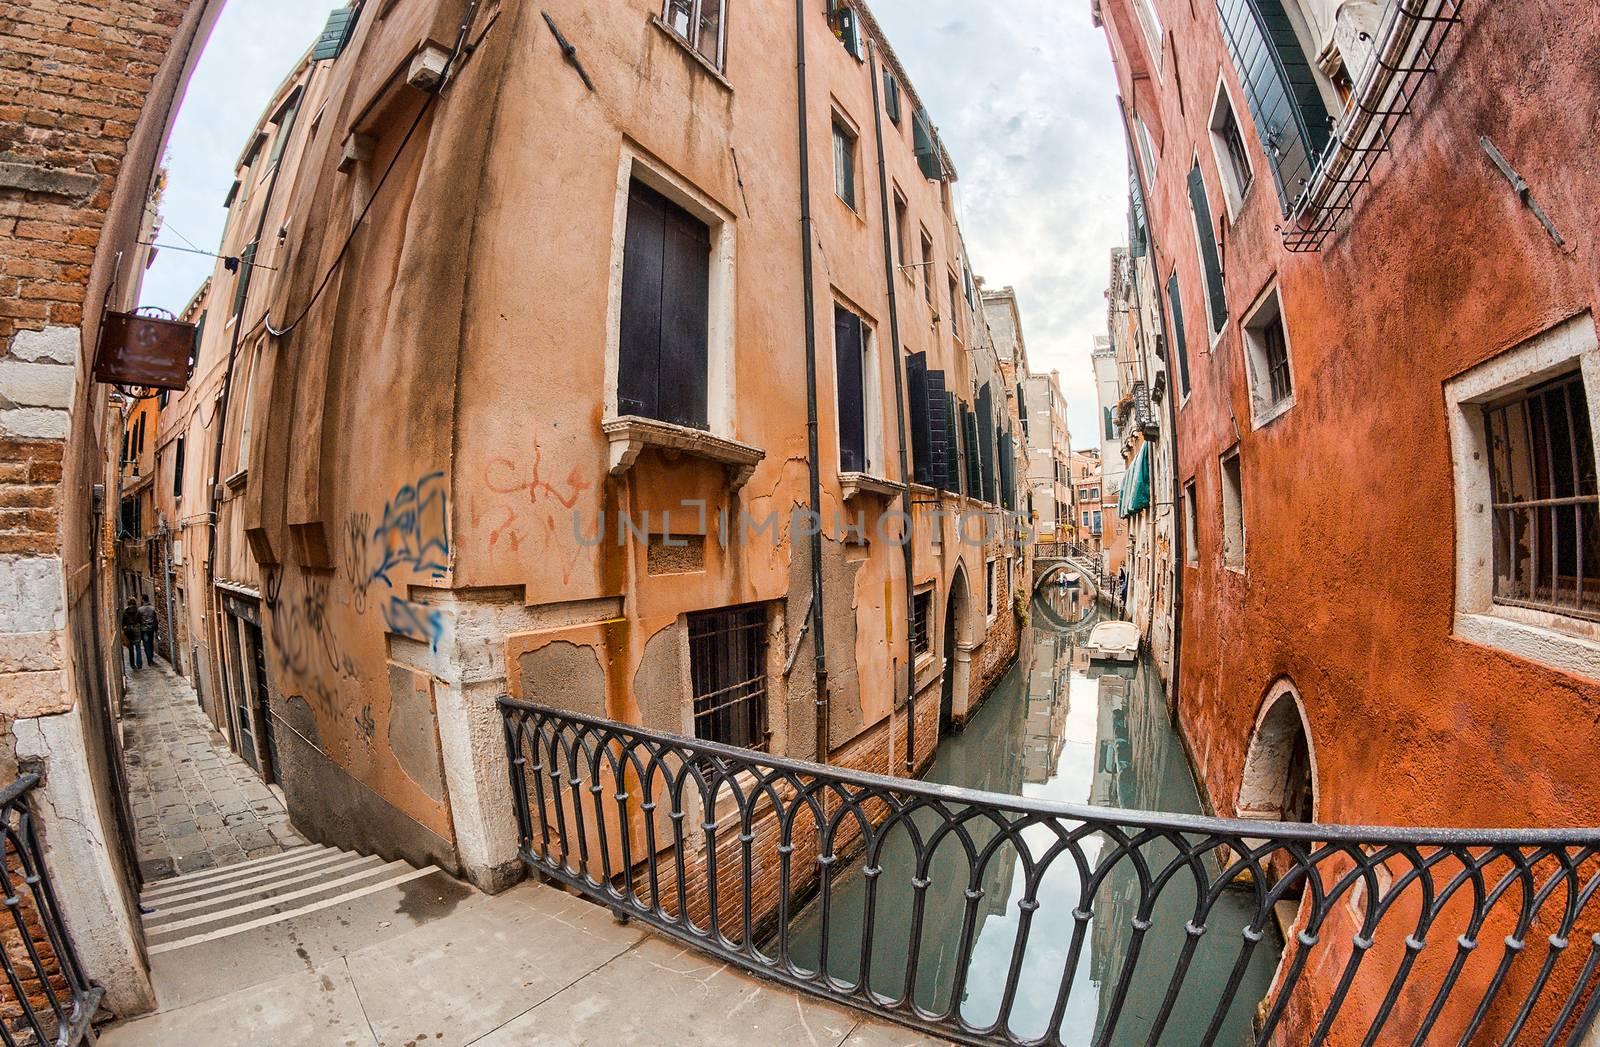 Homes of Venice along city canals by jovannig